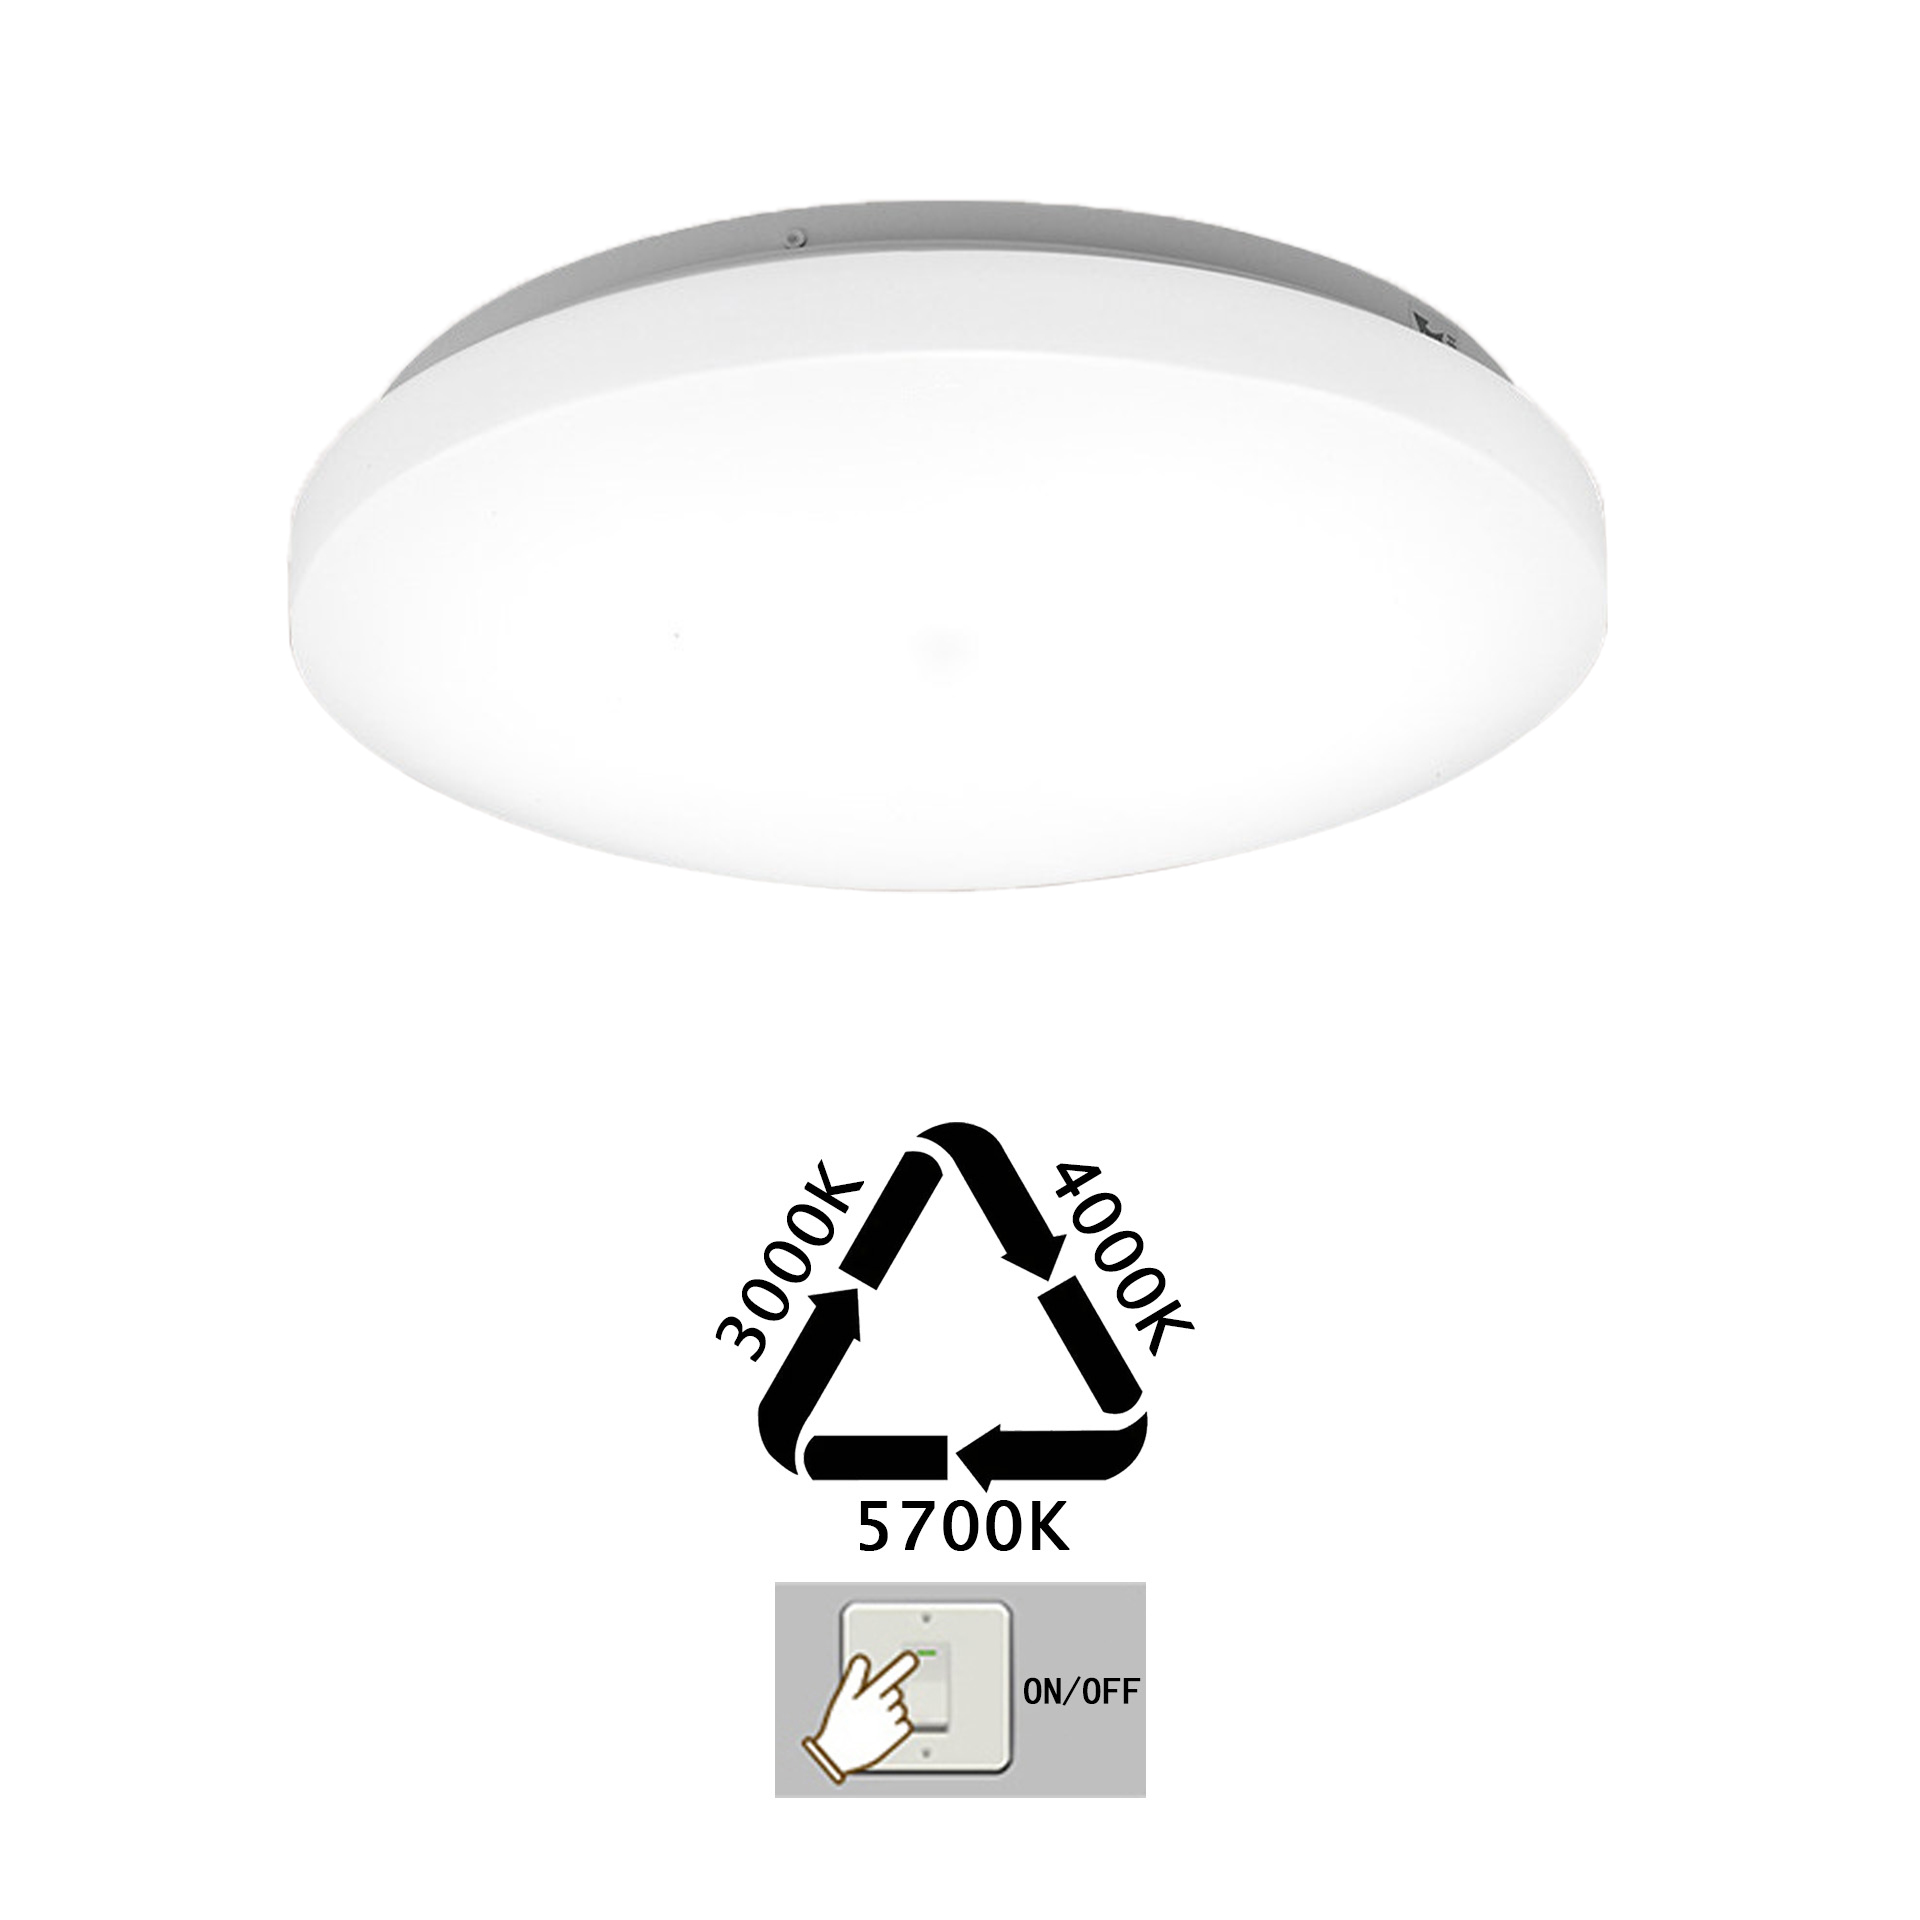 Cloud CCT Change Ceiling light Smooth Dimming